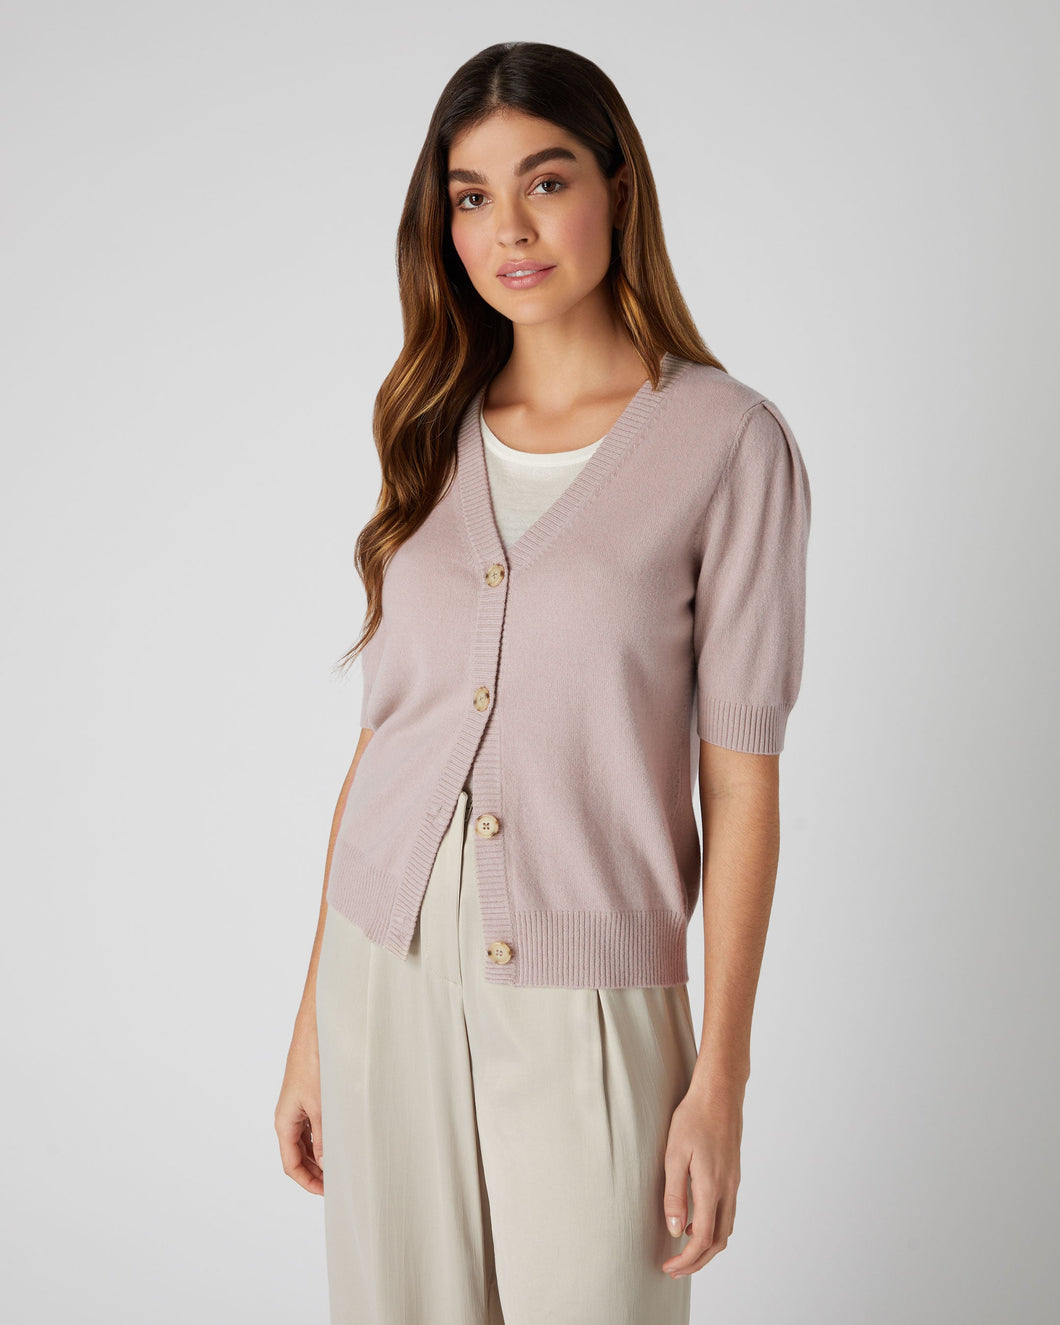 N.Peal Women's Short Sleeve Cashmere Cardigan Canvas Pink